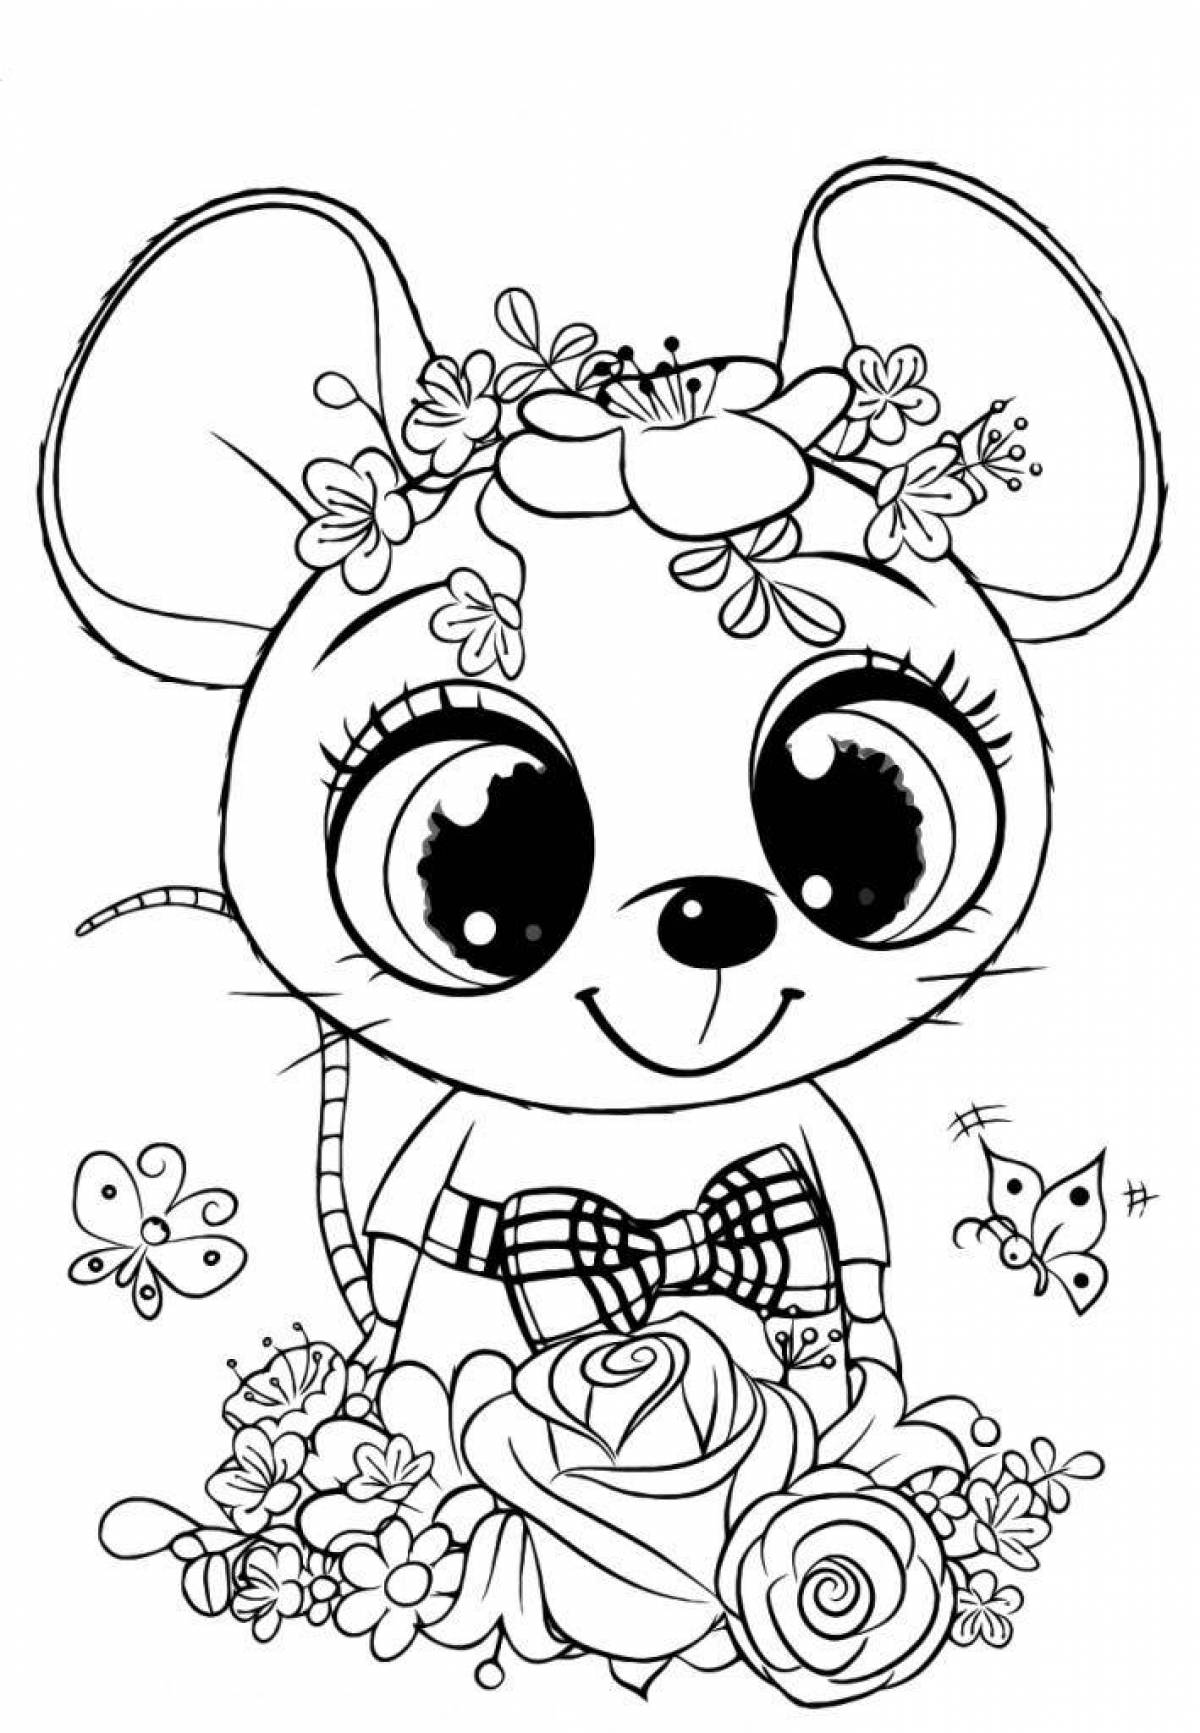 Exquisite animal coloring book for girls